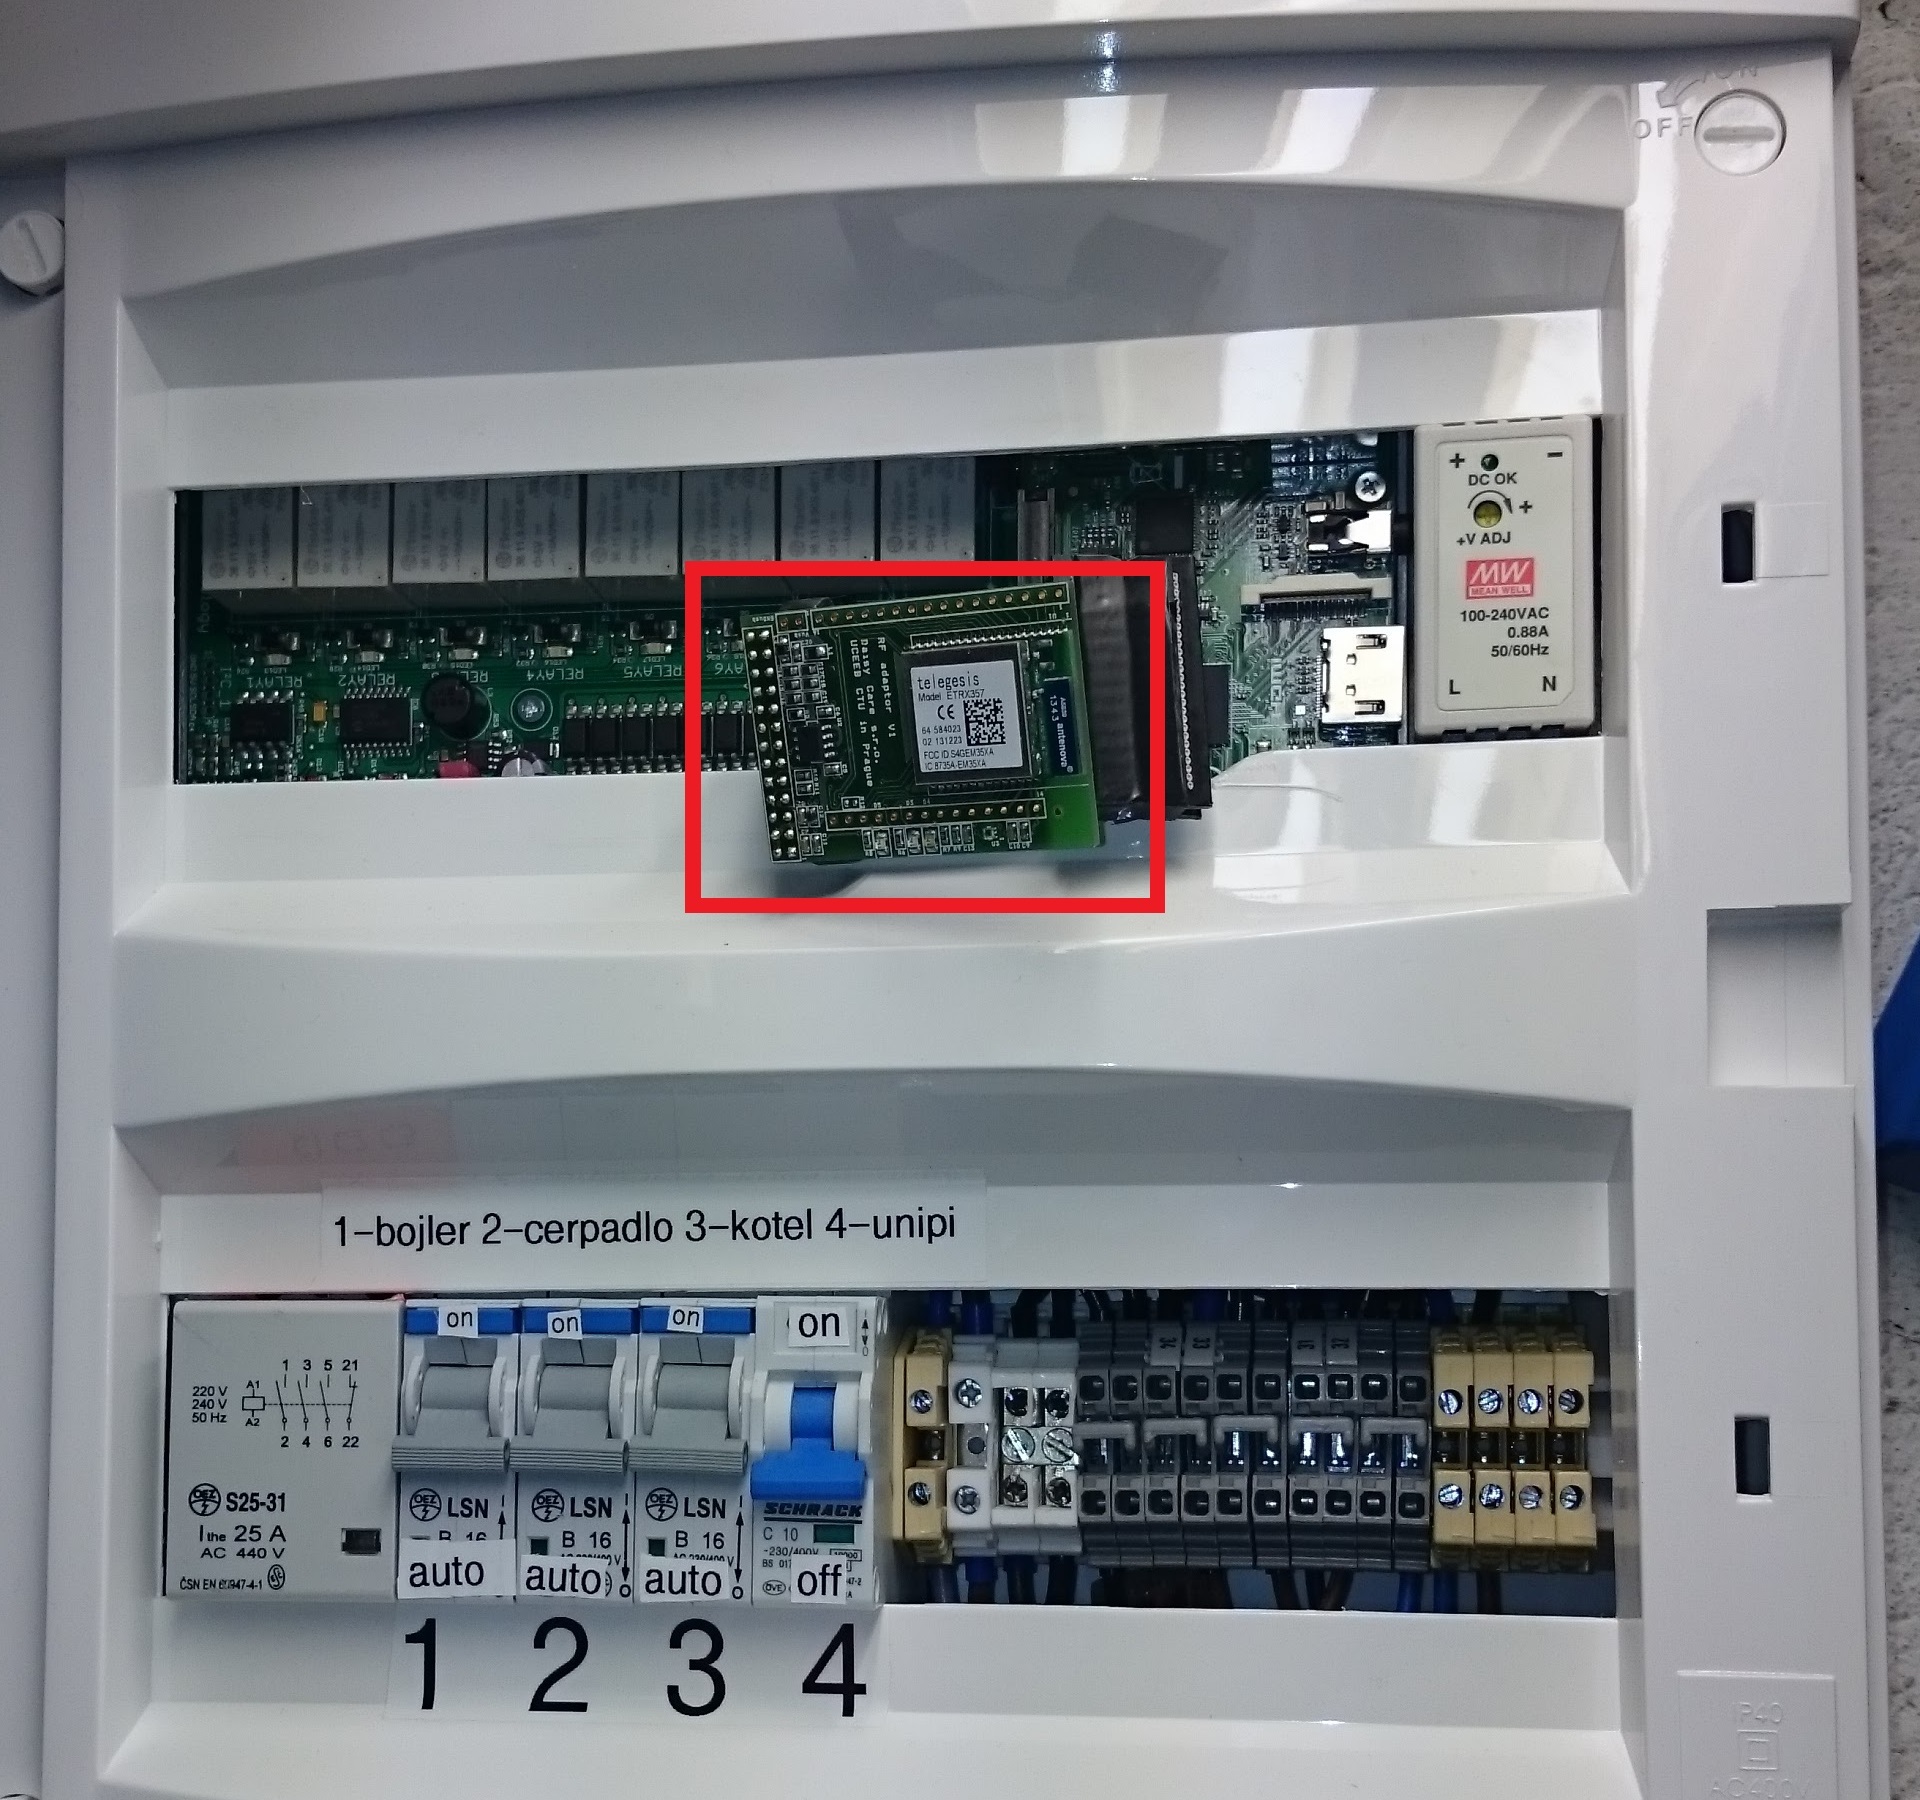 Distribution board with UniPi. The ZigBee chip is marked with the red rectangle.